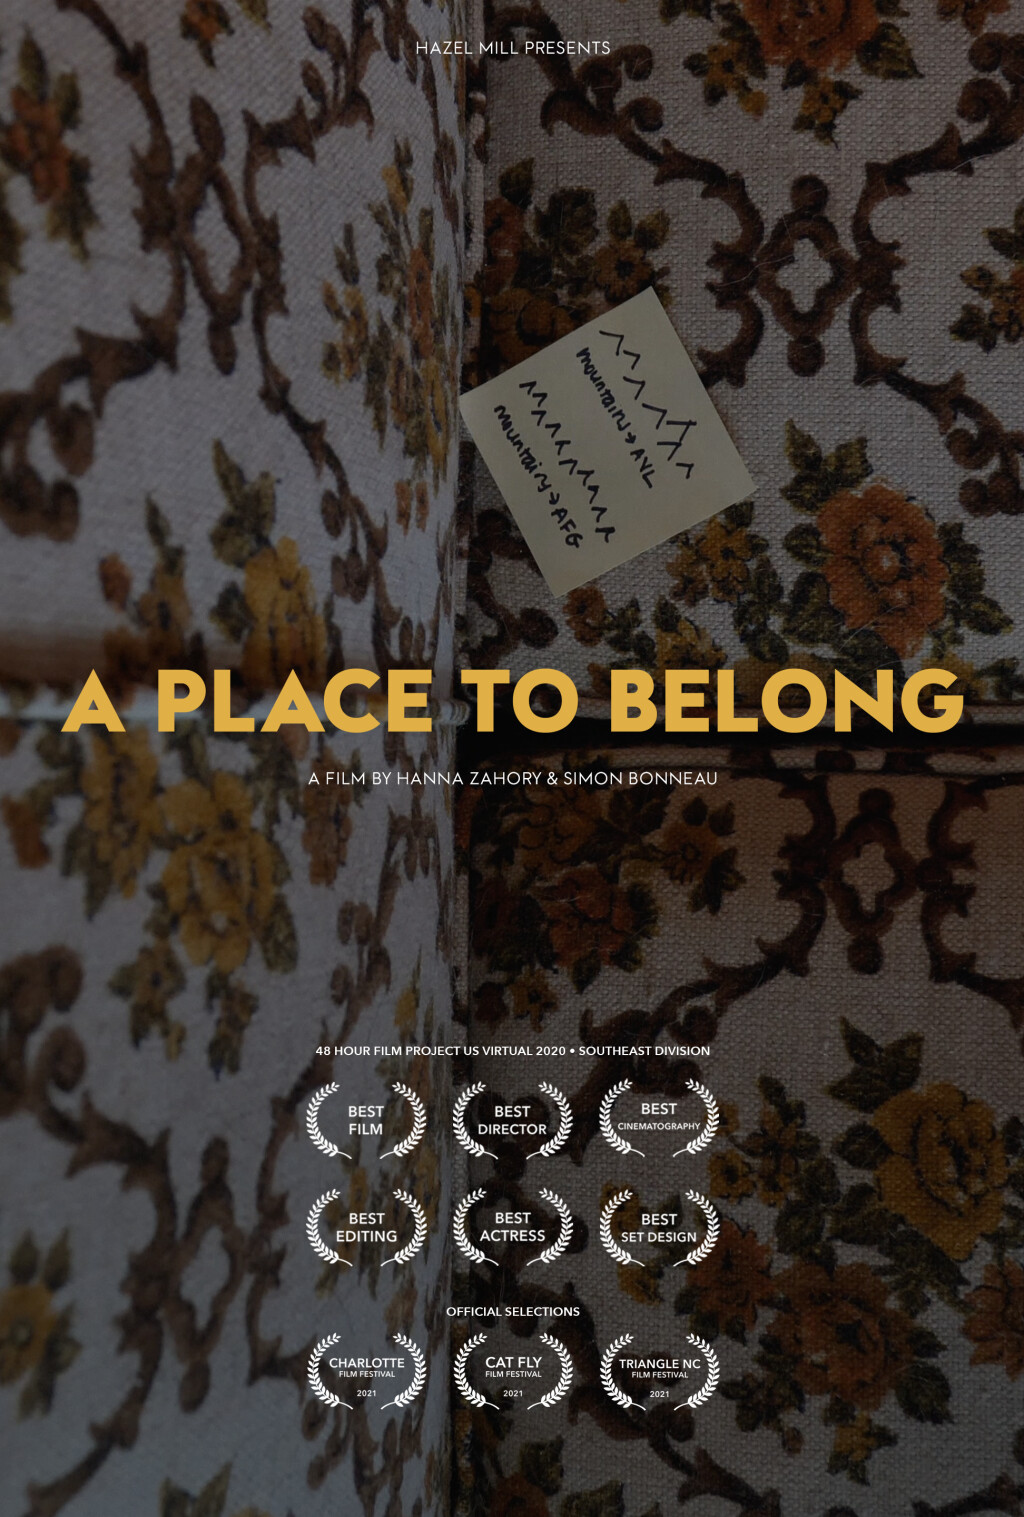 Filmposter for A Place to Belong